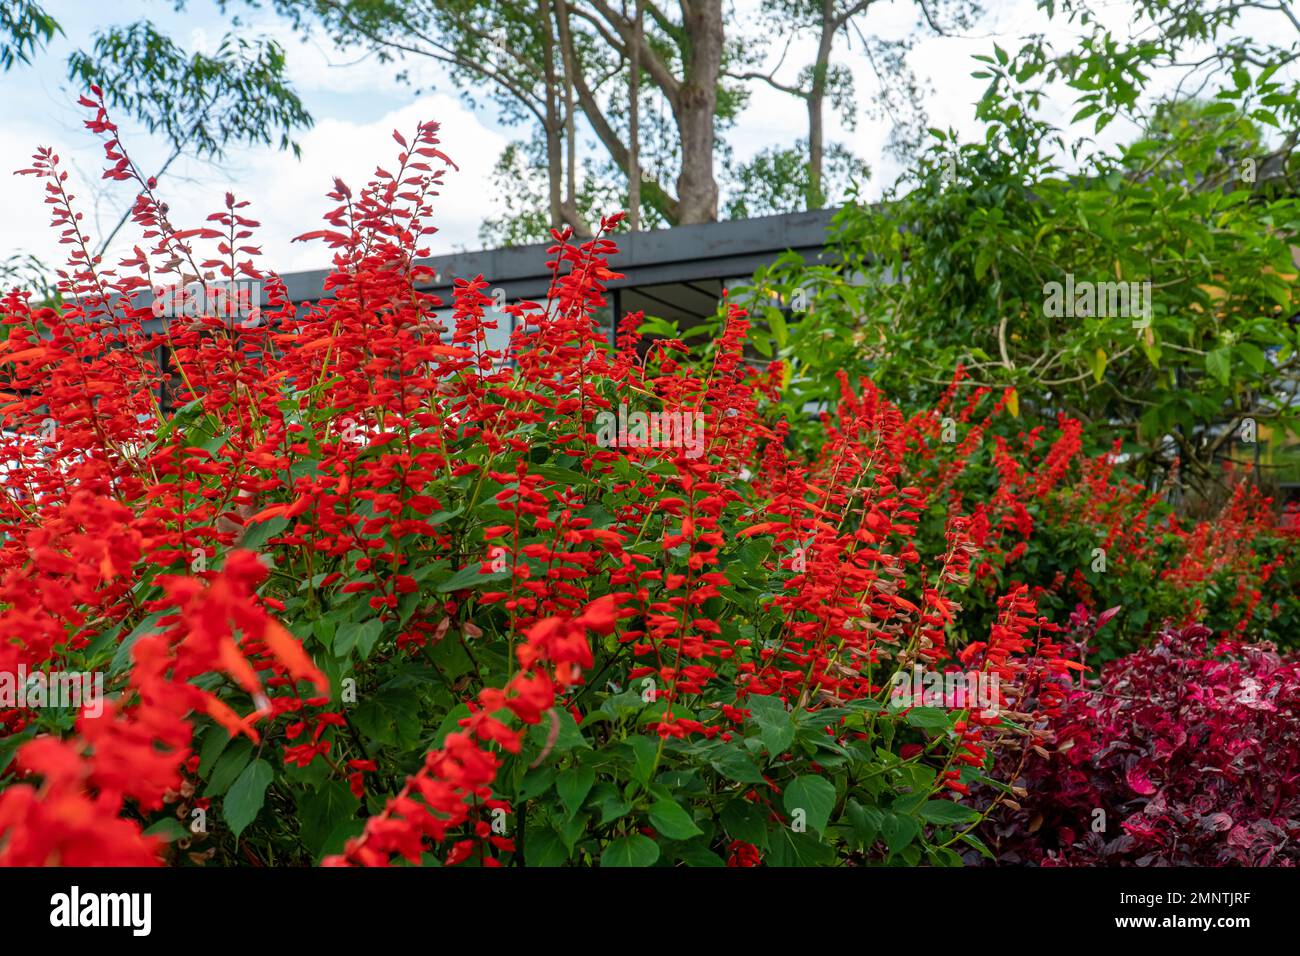 Beautiful flowers Salvia coccinea in the garden. They are often called blood, tropical, Texas, scarlet sage. Red flowers blooming in the park. Stock Photo